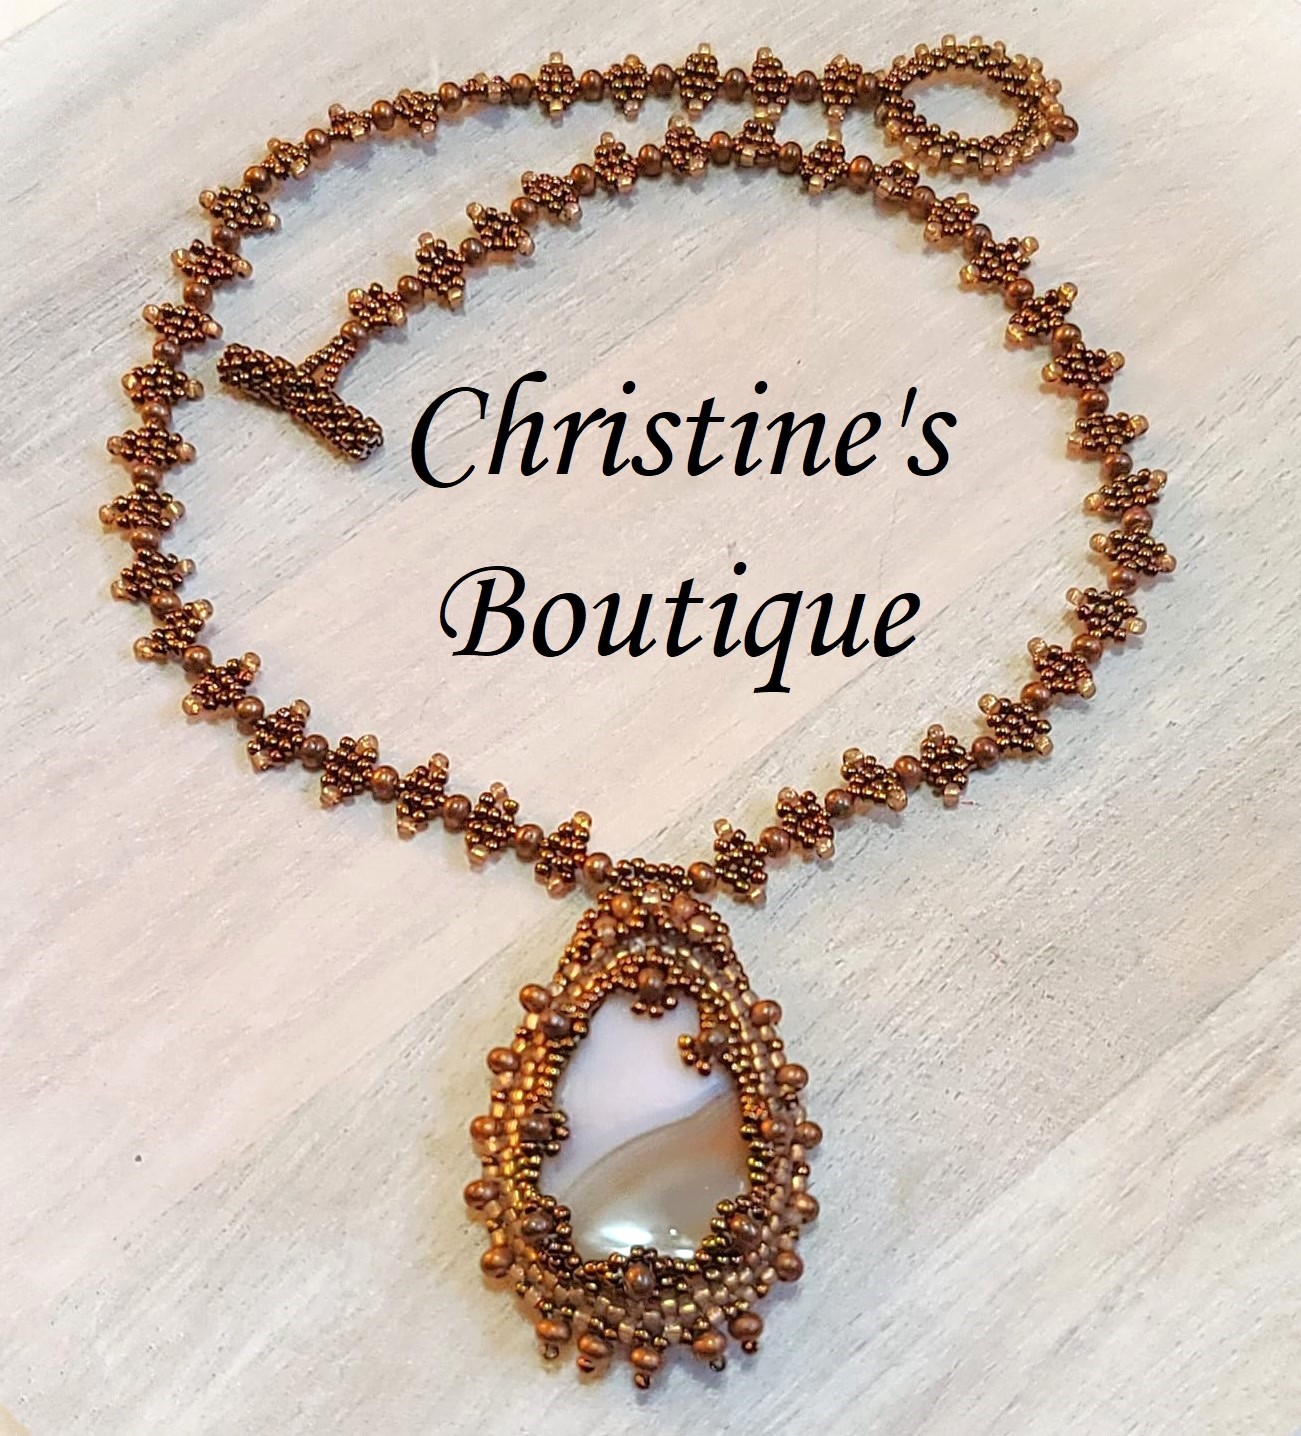 Quartz gemstone pendant necklace with a vintage inspired flair - Click Image to Close